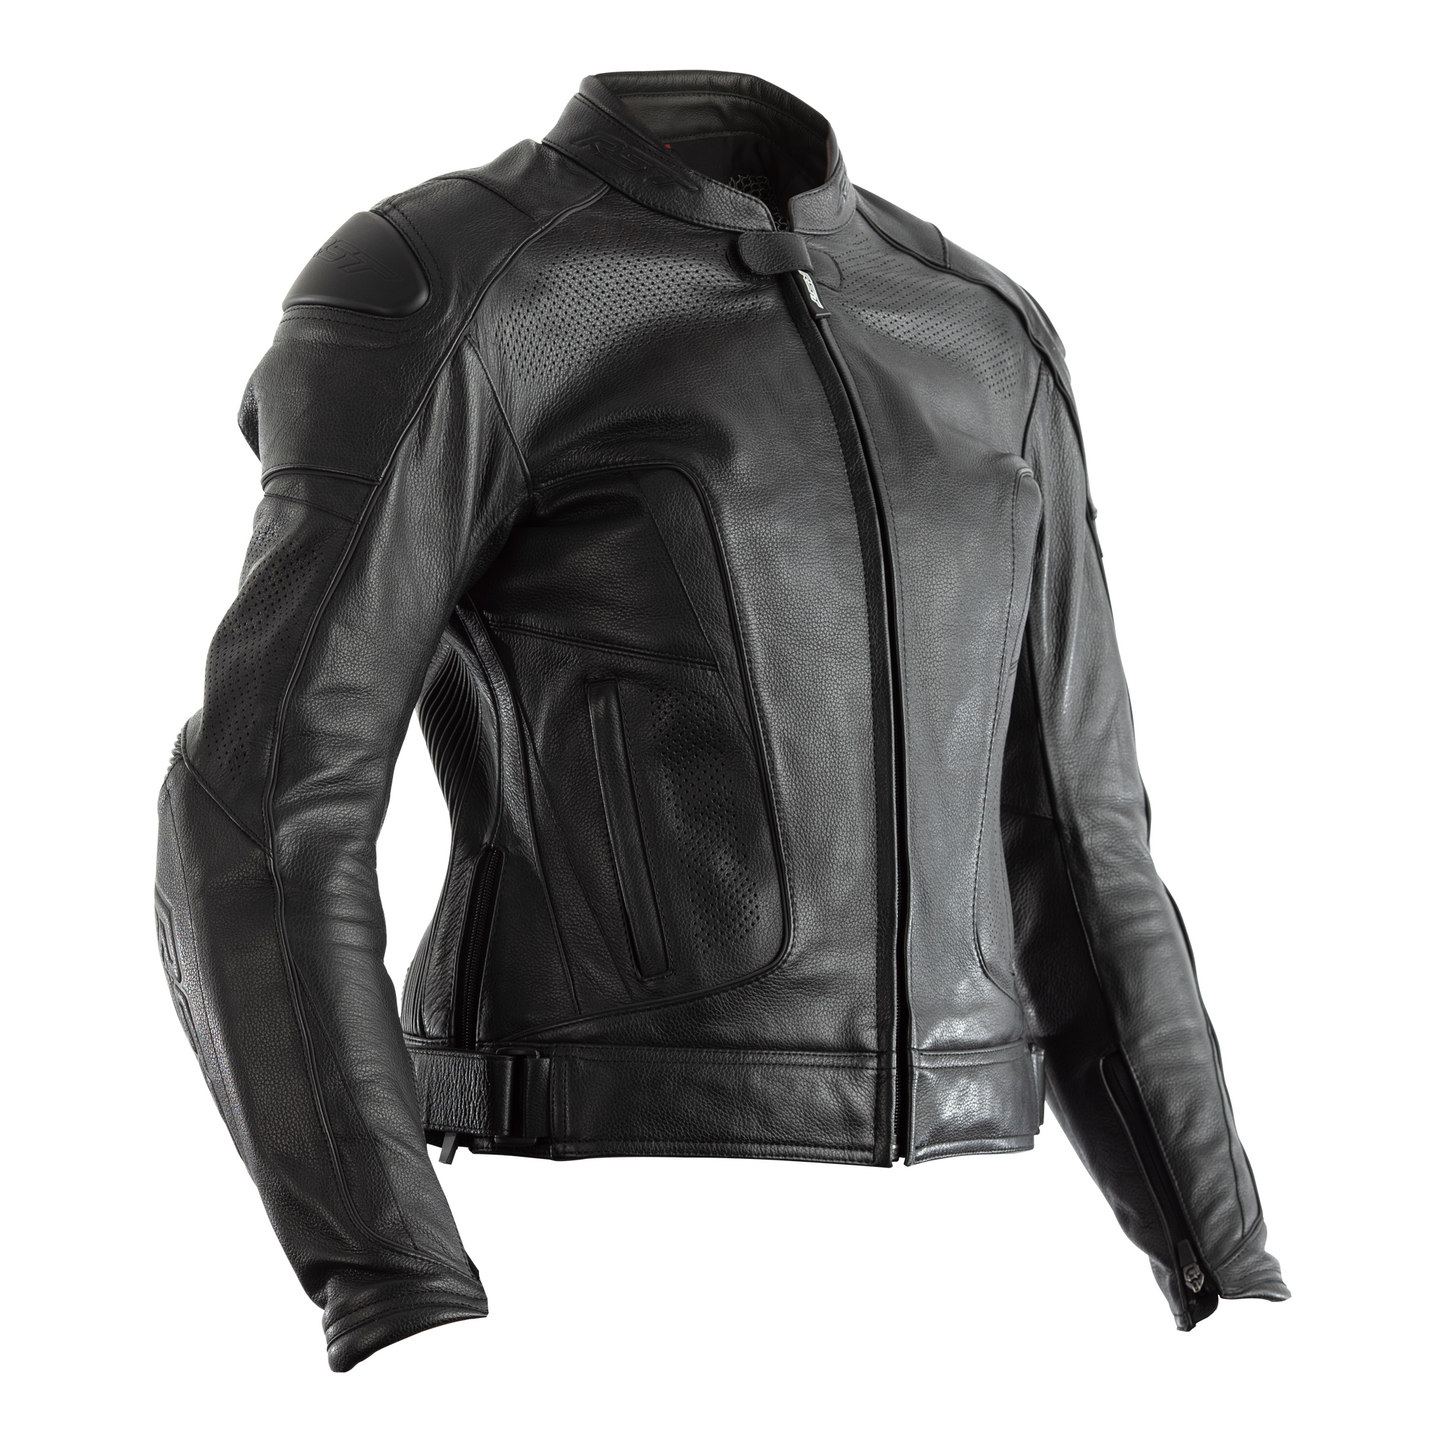 RST GT Leather Ladies Riding Jacket - CE APPROVED - Black